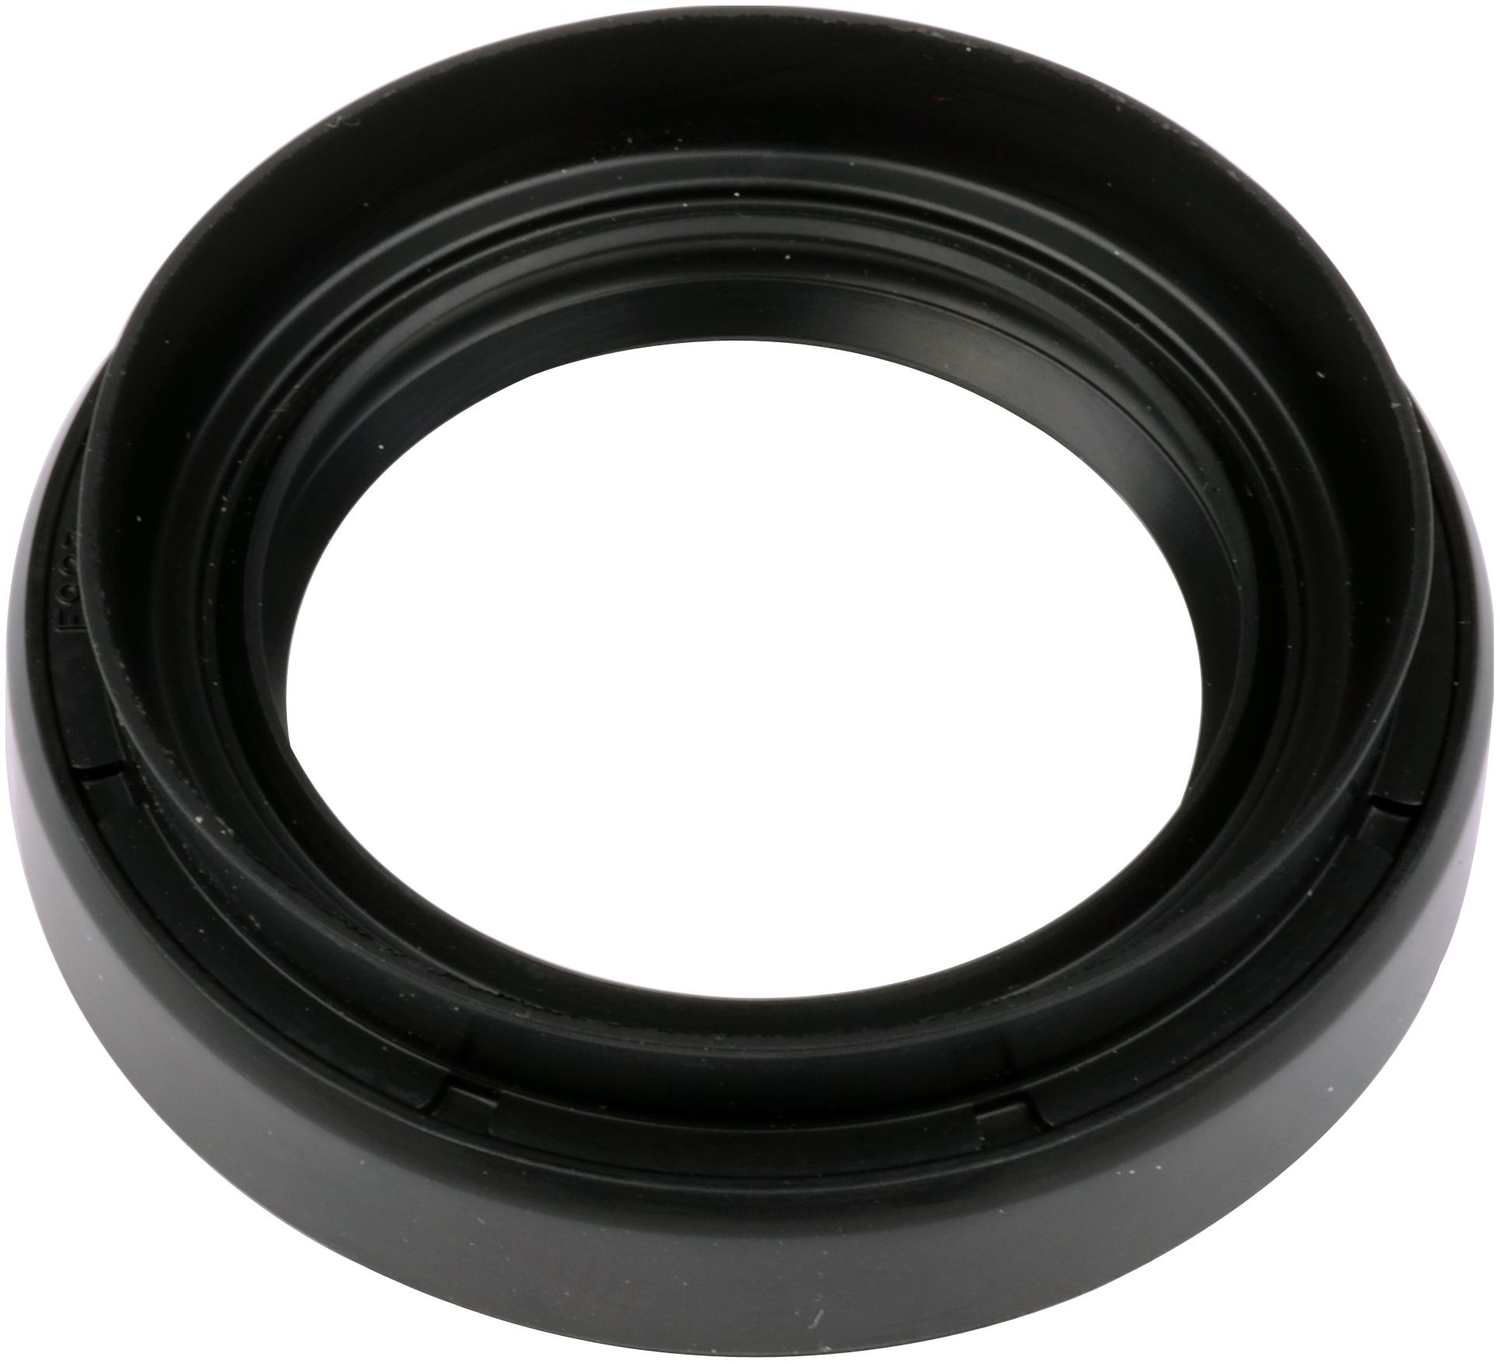 SKF (CHICAGO RAWHIDE) - Manual Trans Output Shaft Seal (Left) - SKF 15372